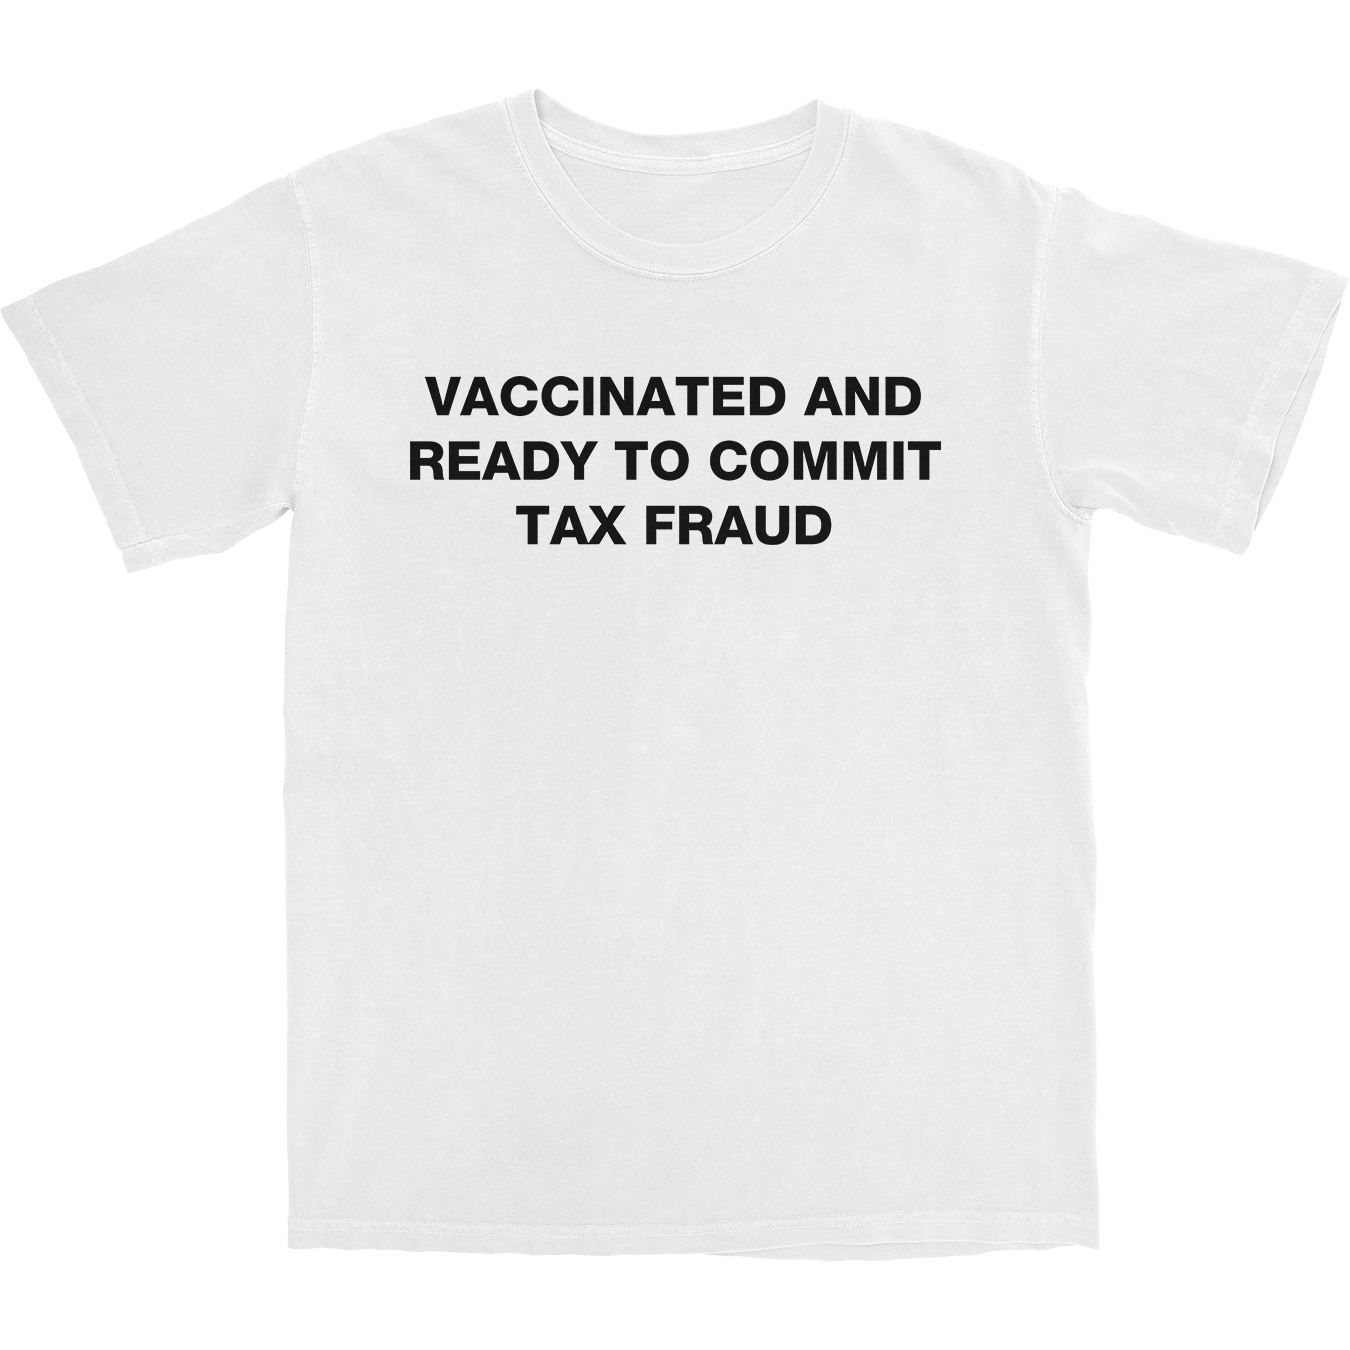 Vaccinated and Ready To Commit Tax Fraud T Shirt